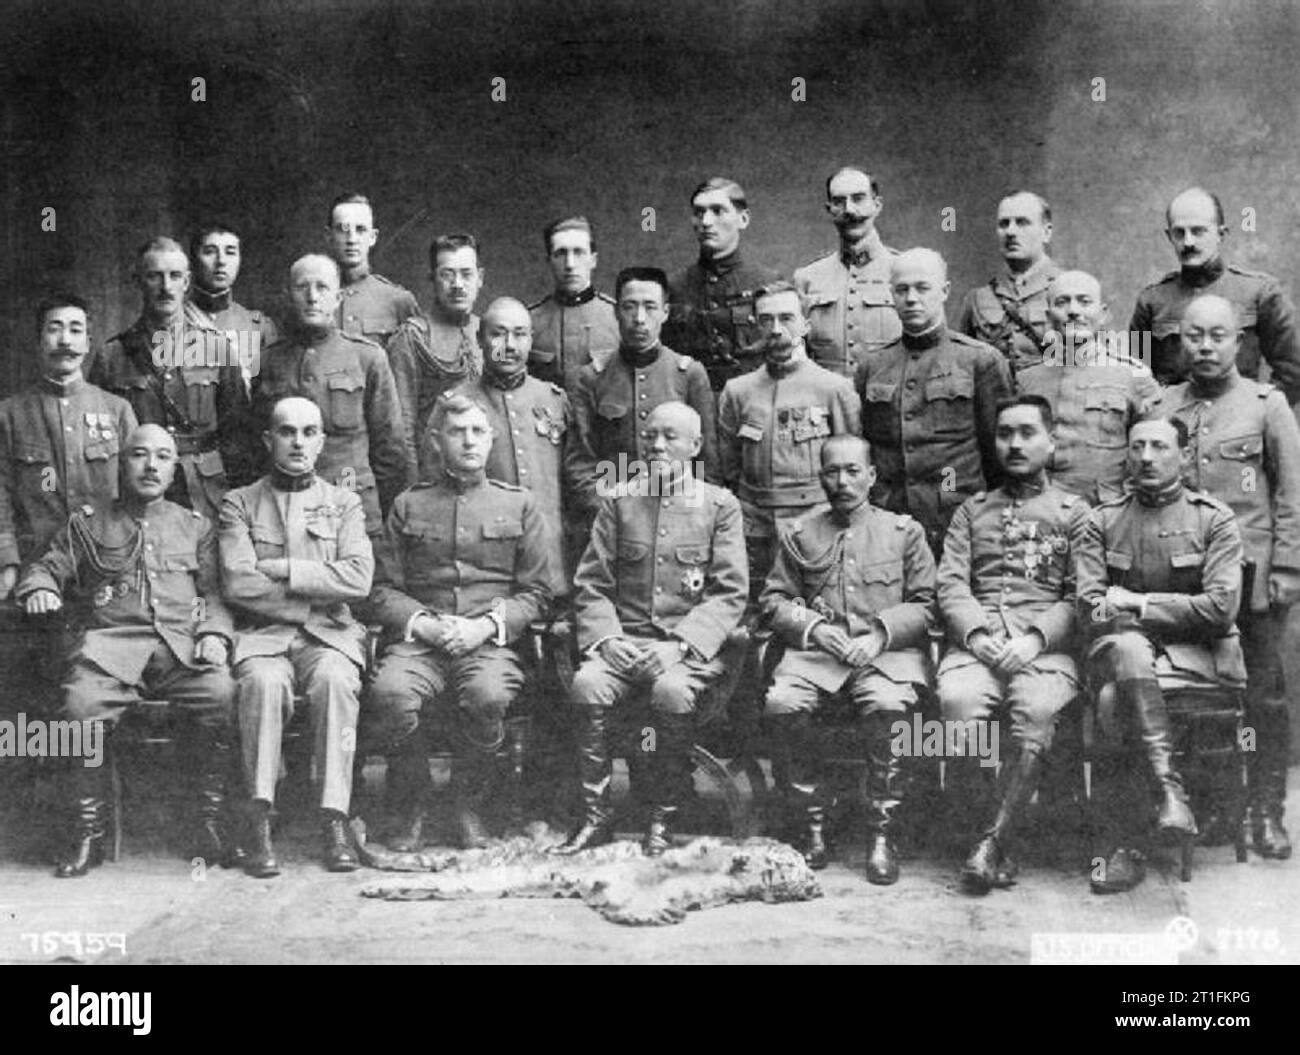 Siberia- Civil War and Western Intervention 1918-1920 Commanding Officers and Chiefs of Staff of the Allied Military Mission to Siberia, Vladivostock. Front row, left to right: Major-General Saburo Inagaki (Japanese Army), Colonel Louis Geissier (Belgian Army), Major General William Sidney Graves (US Army), General Kikuzo Otani (Japanese Army), Lieutenant General Mitsue Yuhi (Japanese Army), Brigadier General Yuyousi (Japanese Army), Lieutenant Colonel Fillippi, Count of Baldissero (Italian Army). Middle row, left to right: Professor M. Maruyama (Japan), Brigadier General J. N. Blair (British Stock Photo